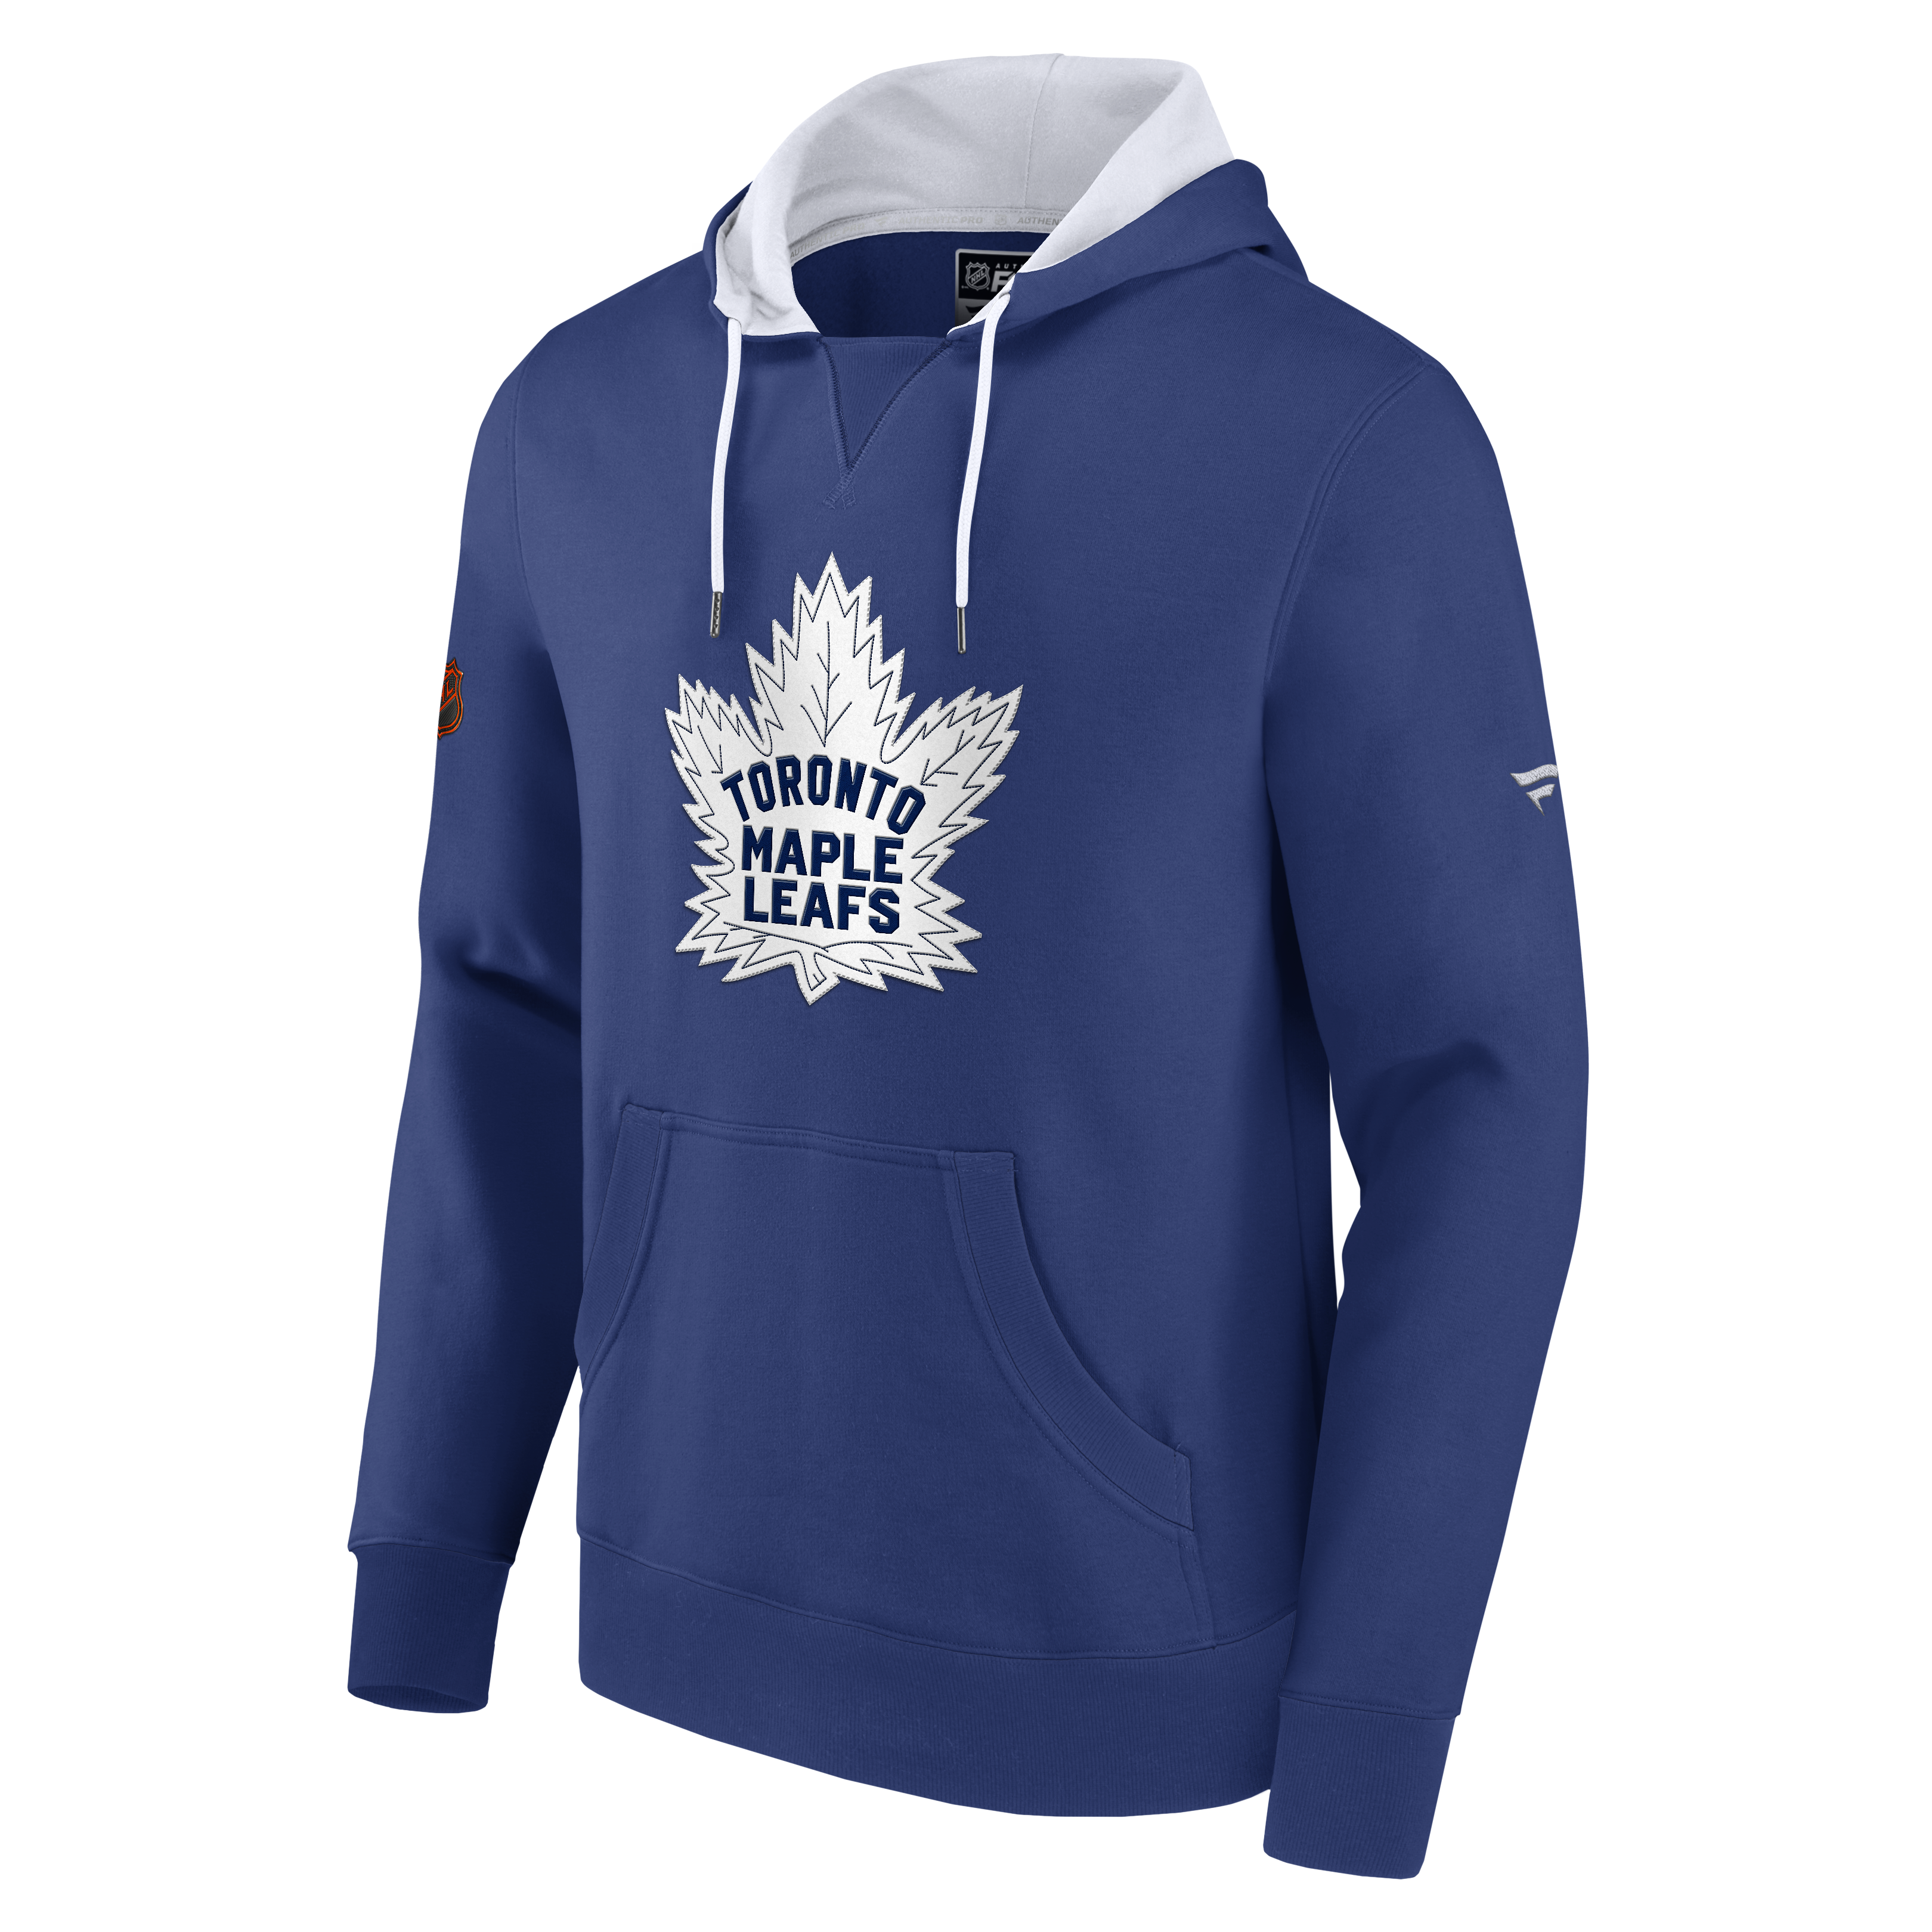 Maple Leafs Men's Authentic Pro Special Edition Hoody – shop.realsports